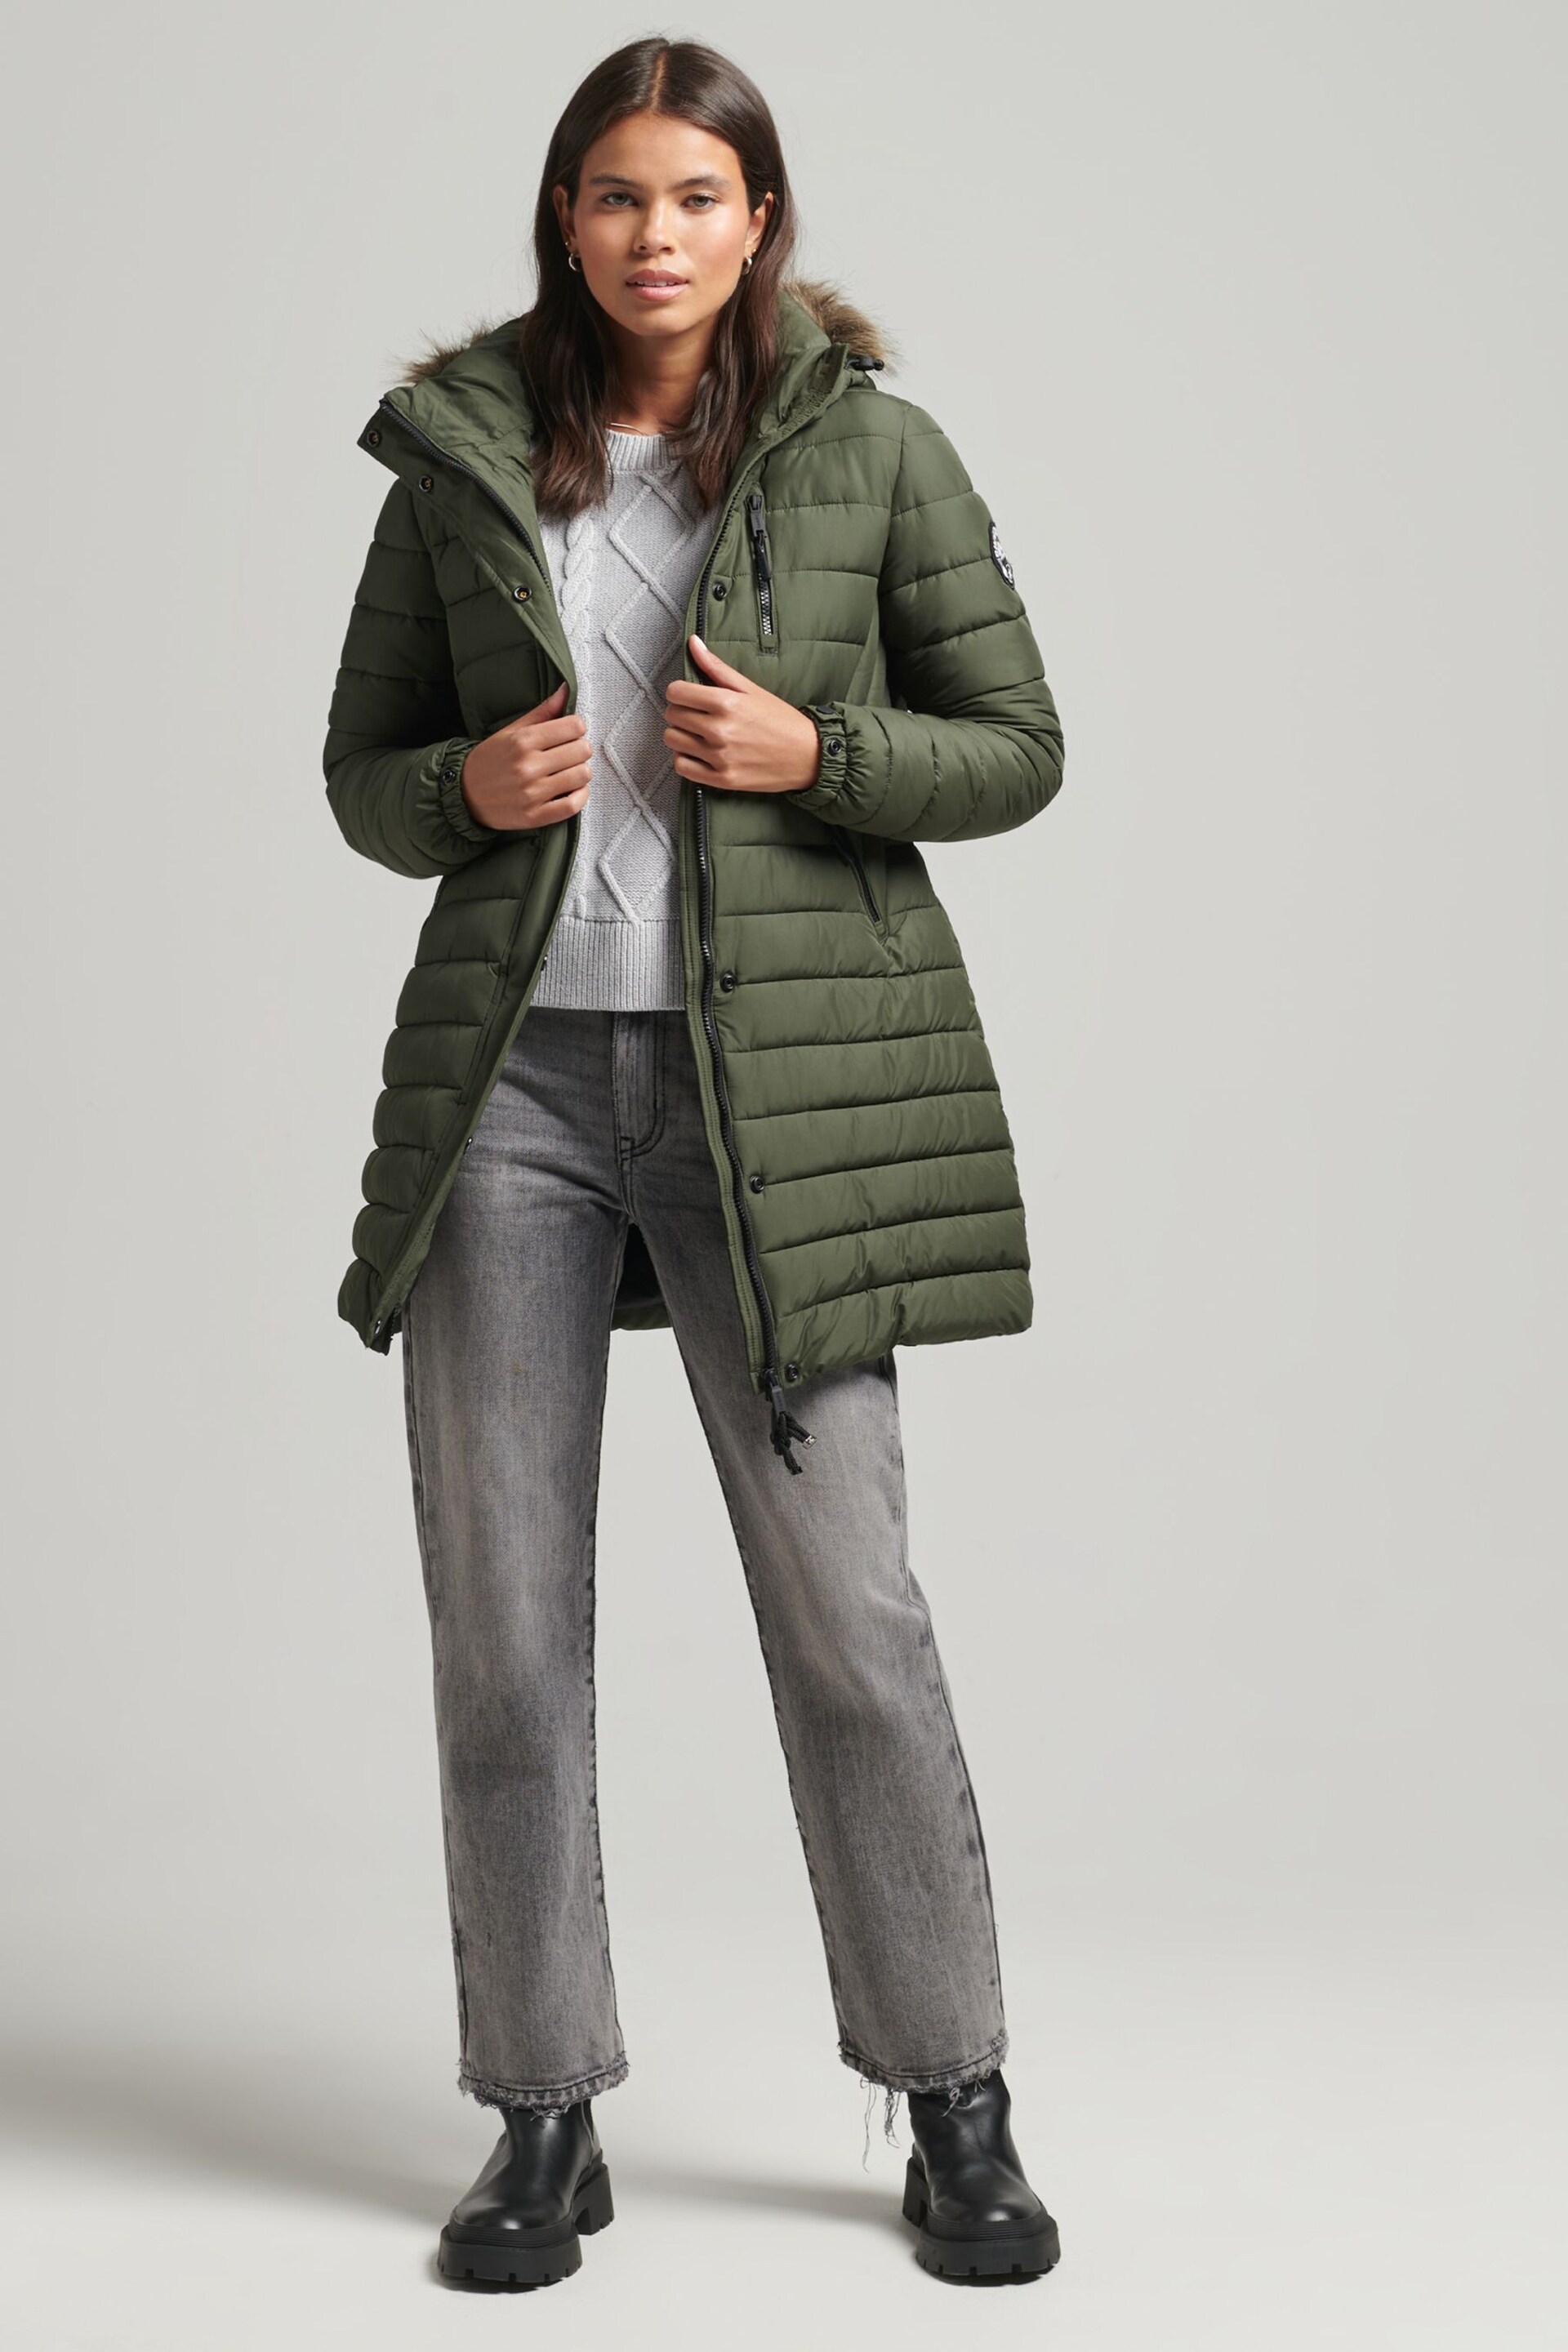 Superdry Green Faux Fur Hooded Mid Length Puffer Jacket - Image 4 of 7